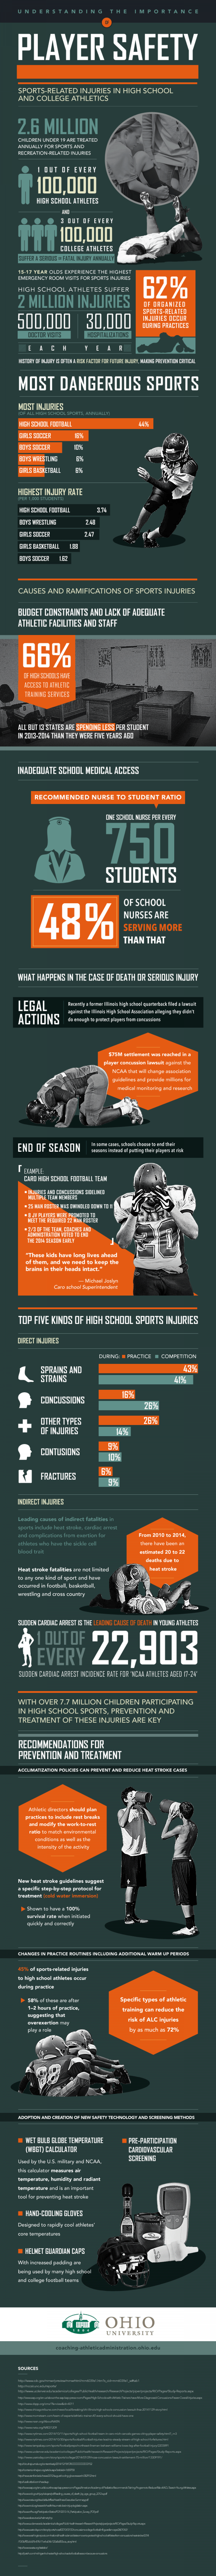 Understanding the Importance of Player Safety  Infographic